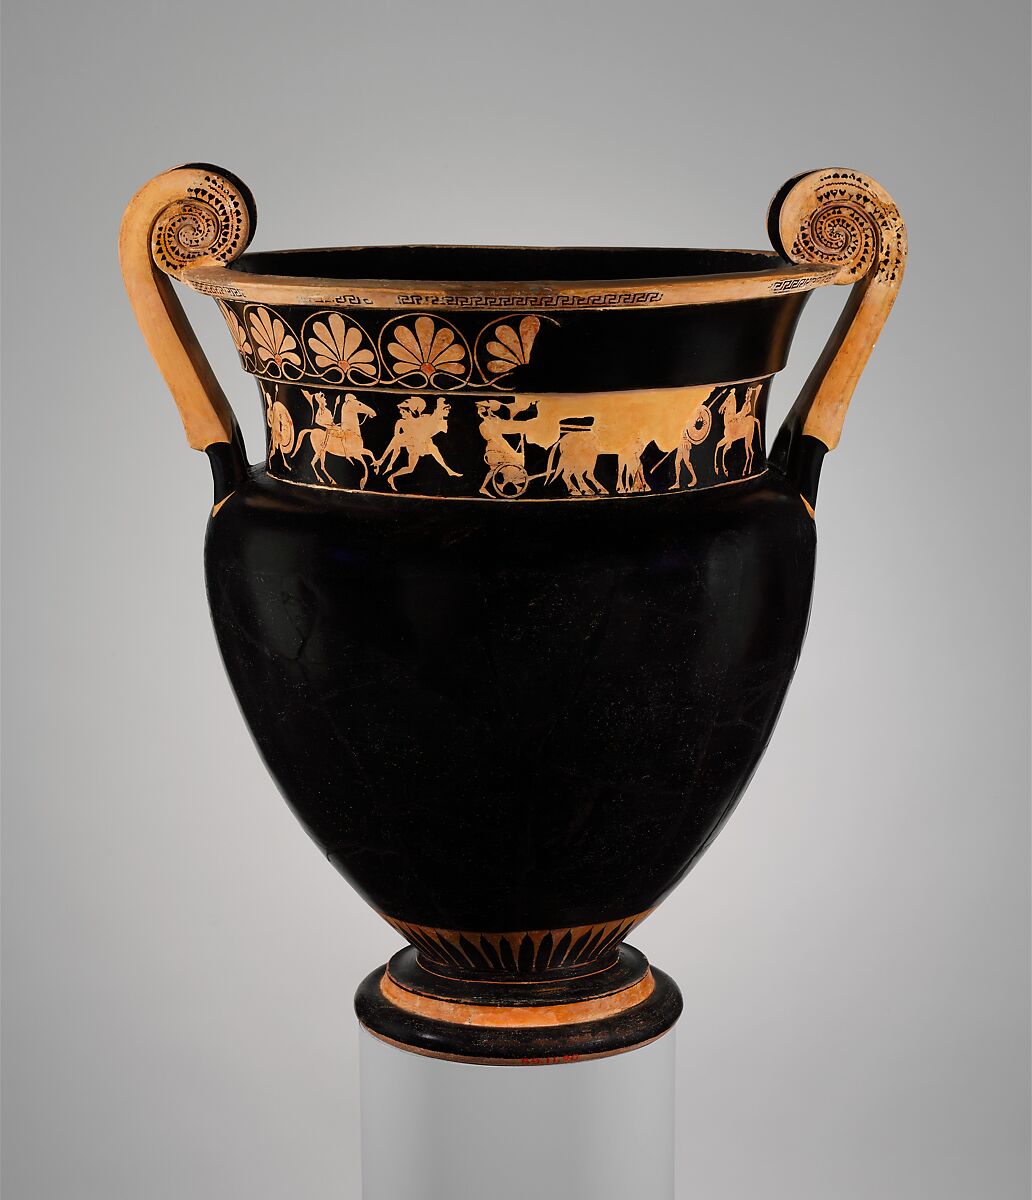 Terracotta volute-krater (bowl for mixing wine and water), Attributed to the Karkinos Painter, Terracotta, Greek, Attic 